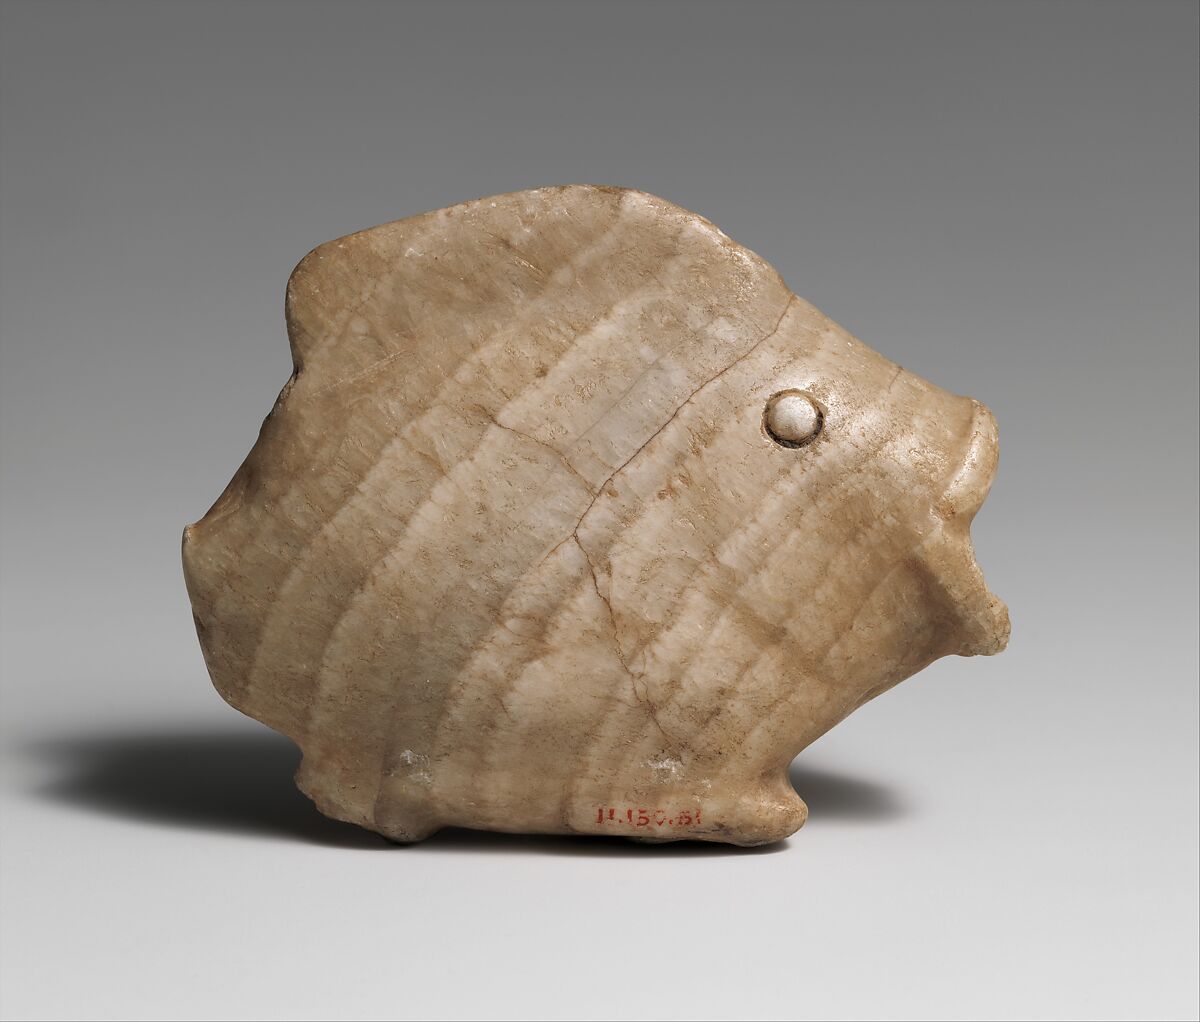 Ointment vase in the shape of a bolti fish, Travertine (Egyptian alabaster) 